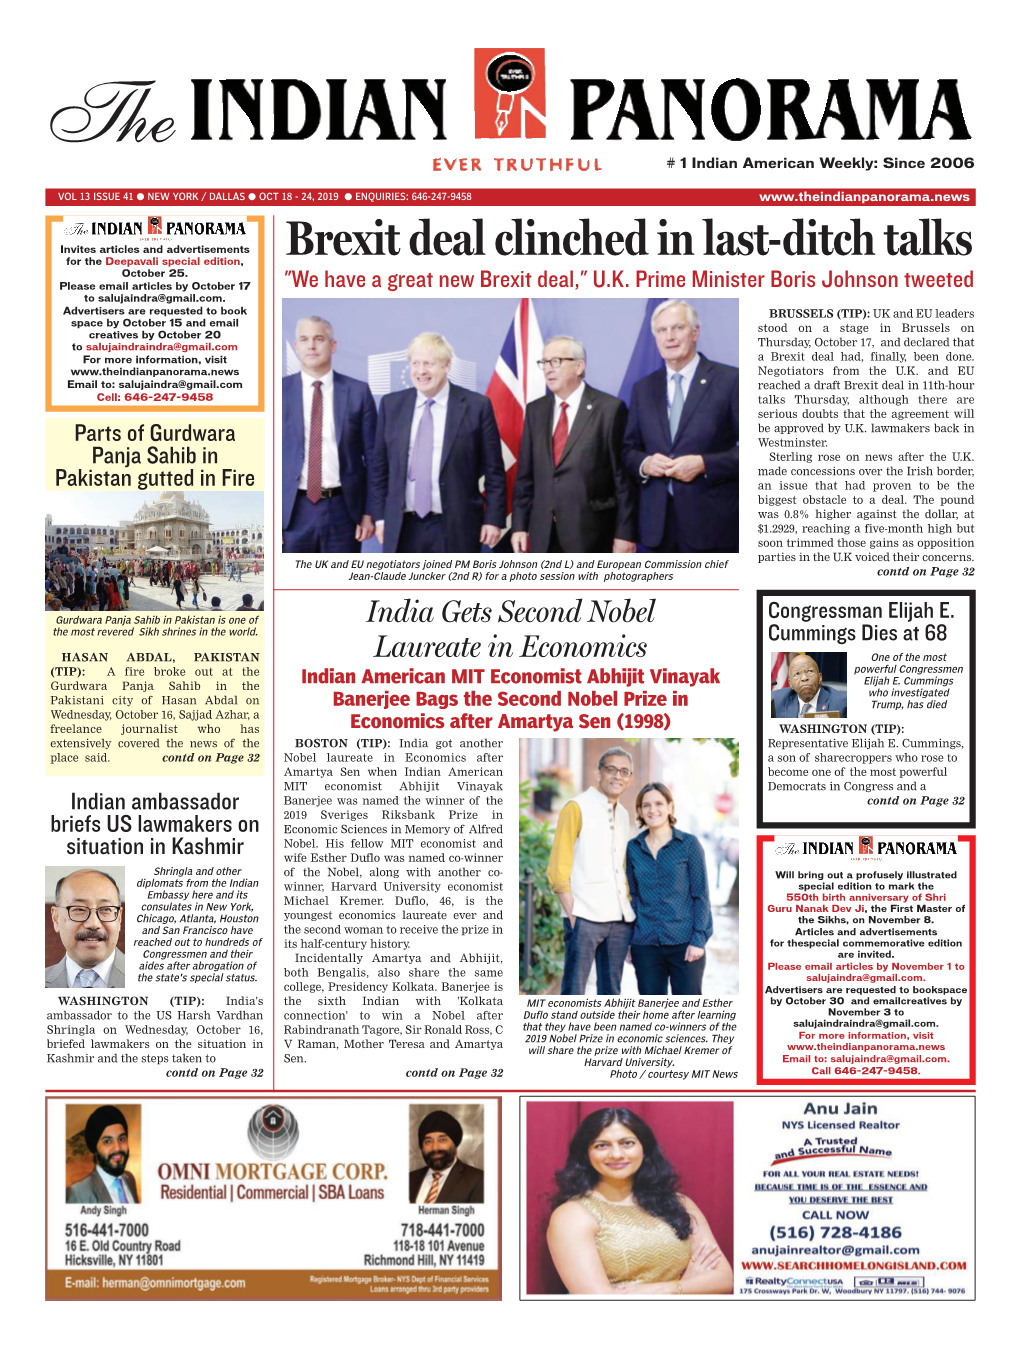 Brexit Deal Clinched in Last-Ditch Talks for the Deepavali Special Edition, October 25